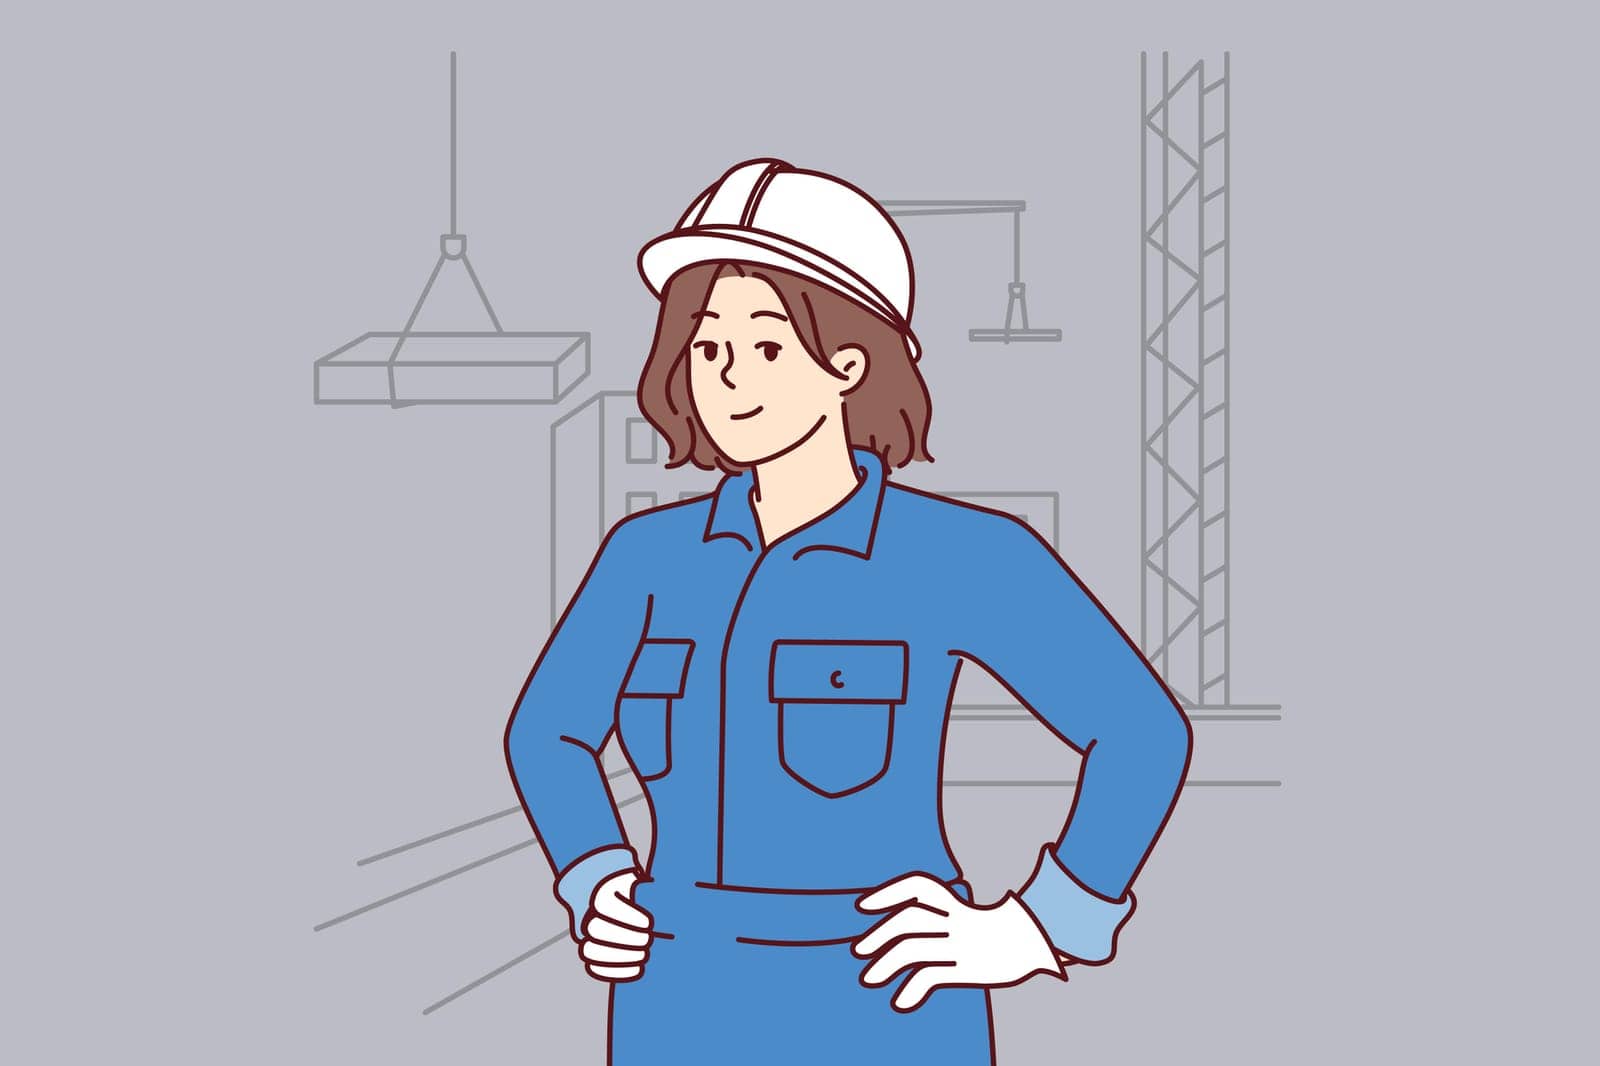 Woman builder stands on construction site near multi-story buildings and tower cranes lifting concrete slabs. Confident girl builder in hardhat on head, keeps hands on belt and looks at screen